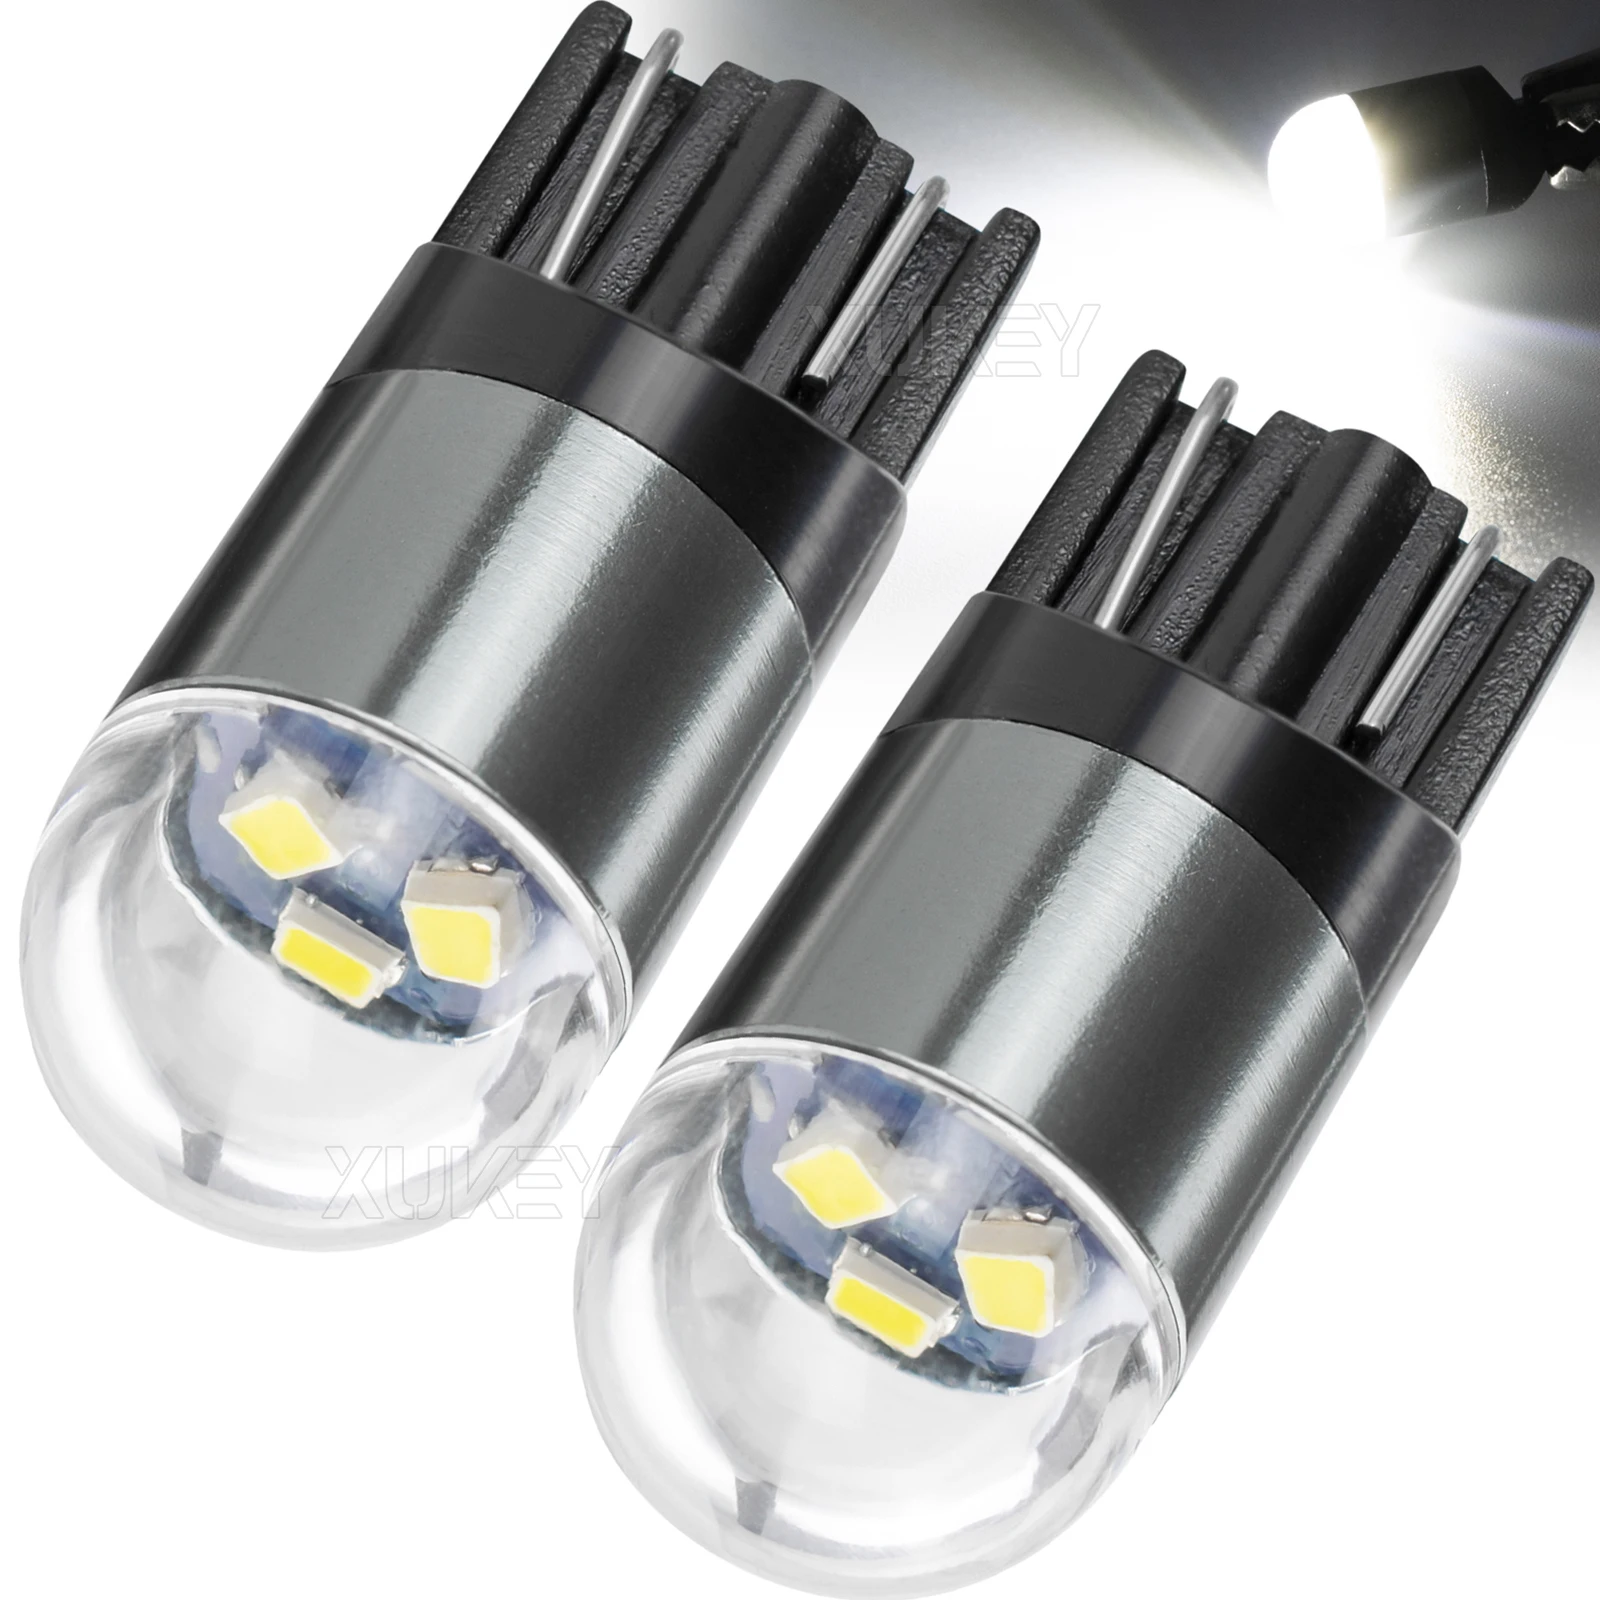 

T10 921 194 168 912 LED Bulbs White 2-Pack Super Bright 12 Volt LED Replacement Car Trunk Interior Dome Map License Plate Lights